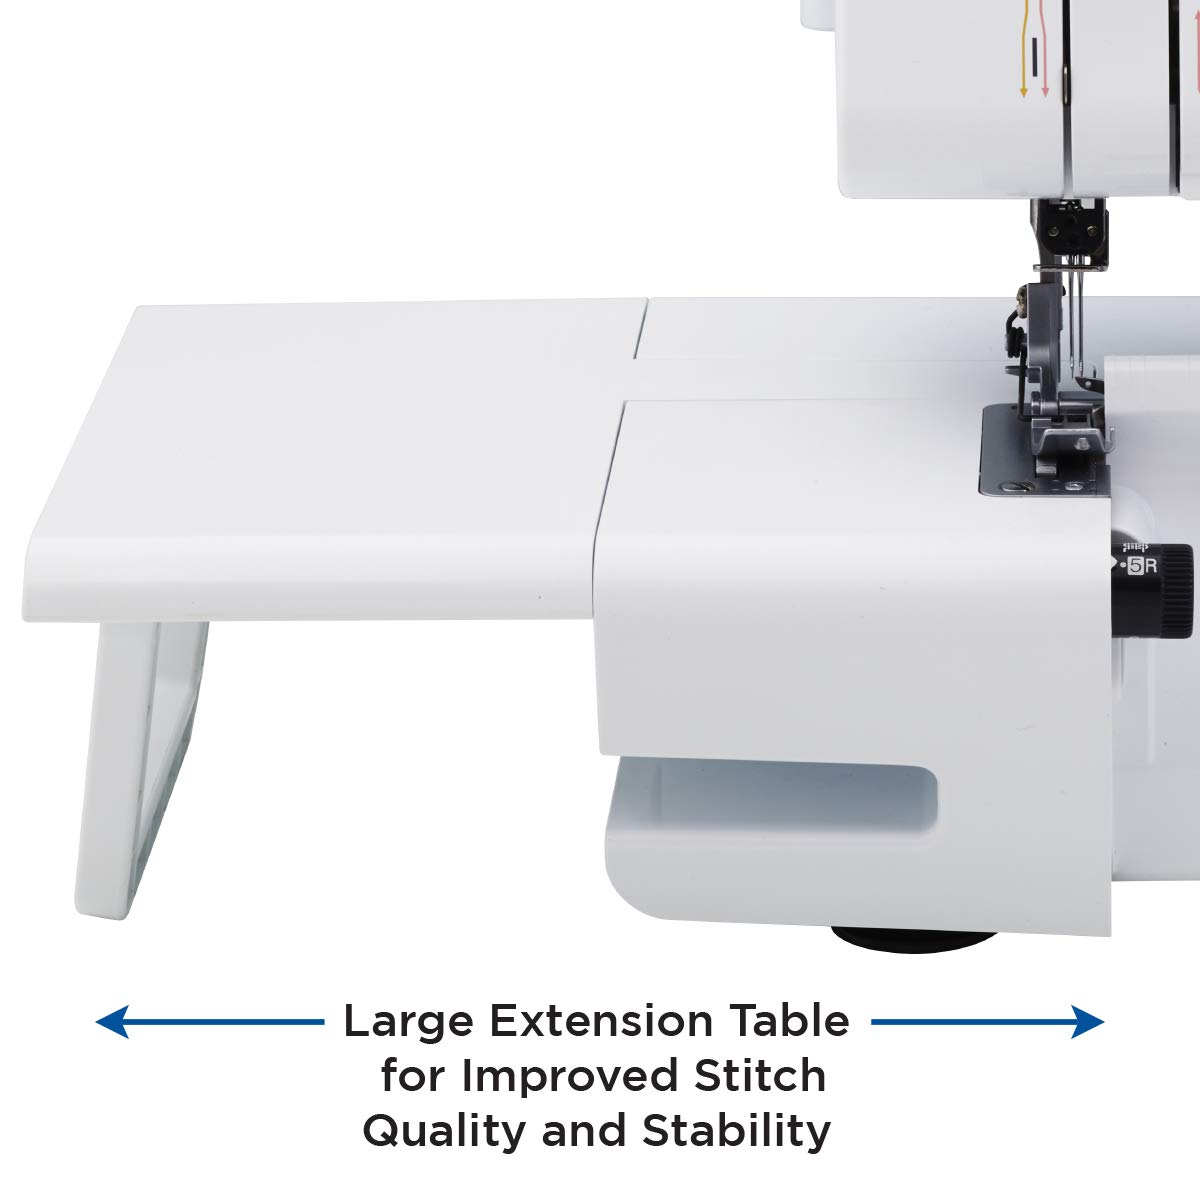 Brother ST4031HD Serger, Strong & Tough Serger, 1,300 Stitches Per Minute, Durable Metal Frame Overlock Machine, Large Extension Table, 3 Included Accessory Feet